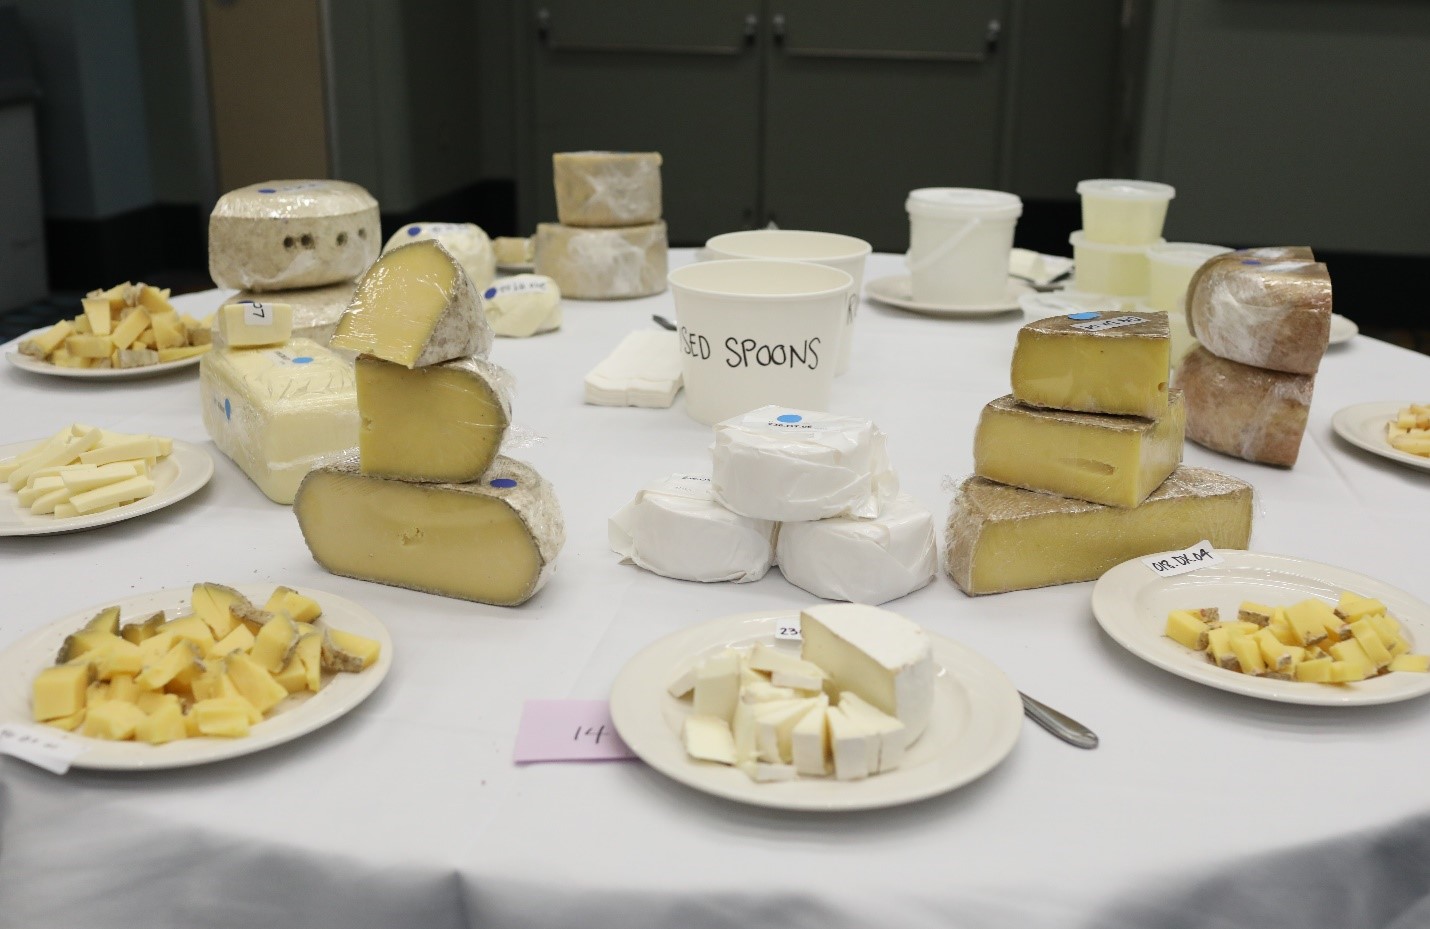 The American Cheese Society Judging and Competition will take place May 19-20, 2022